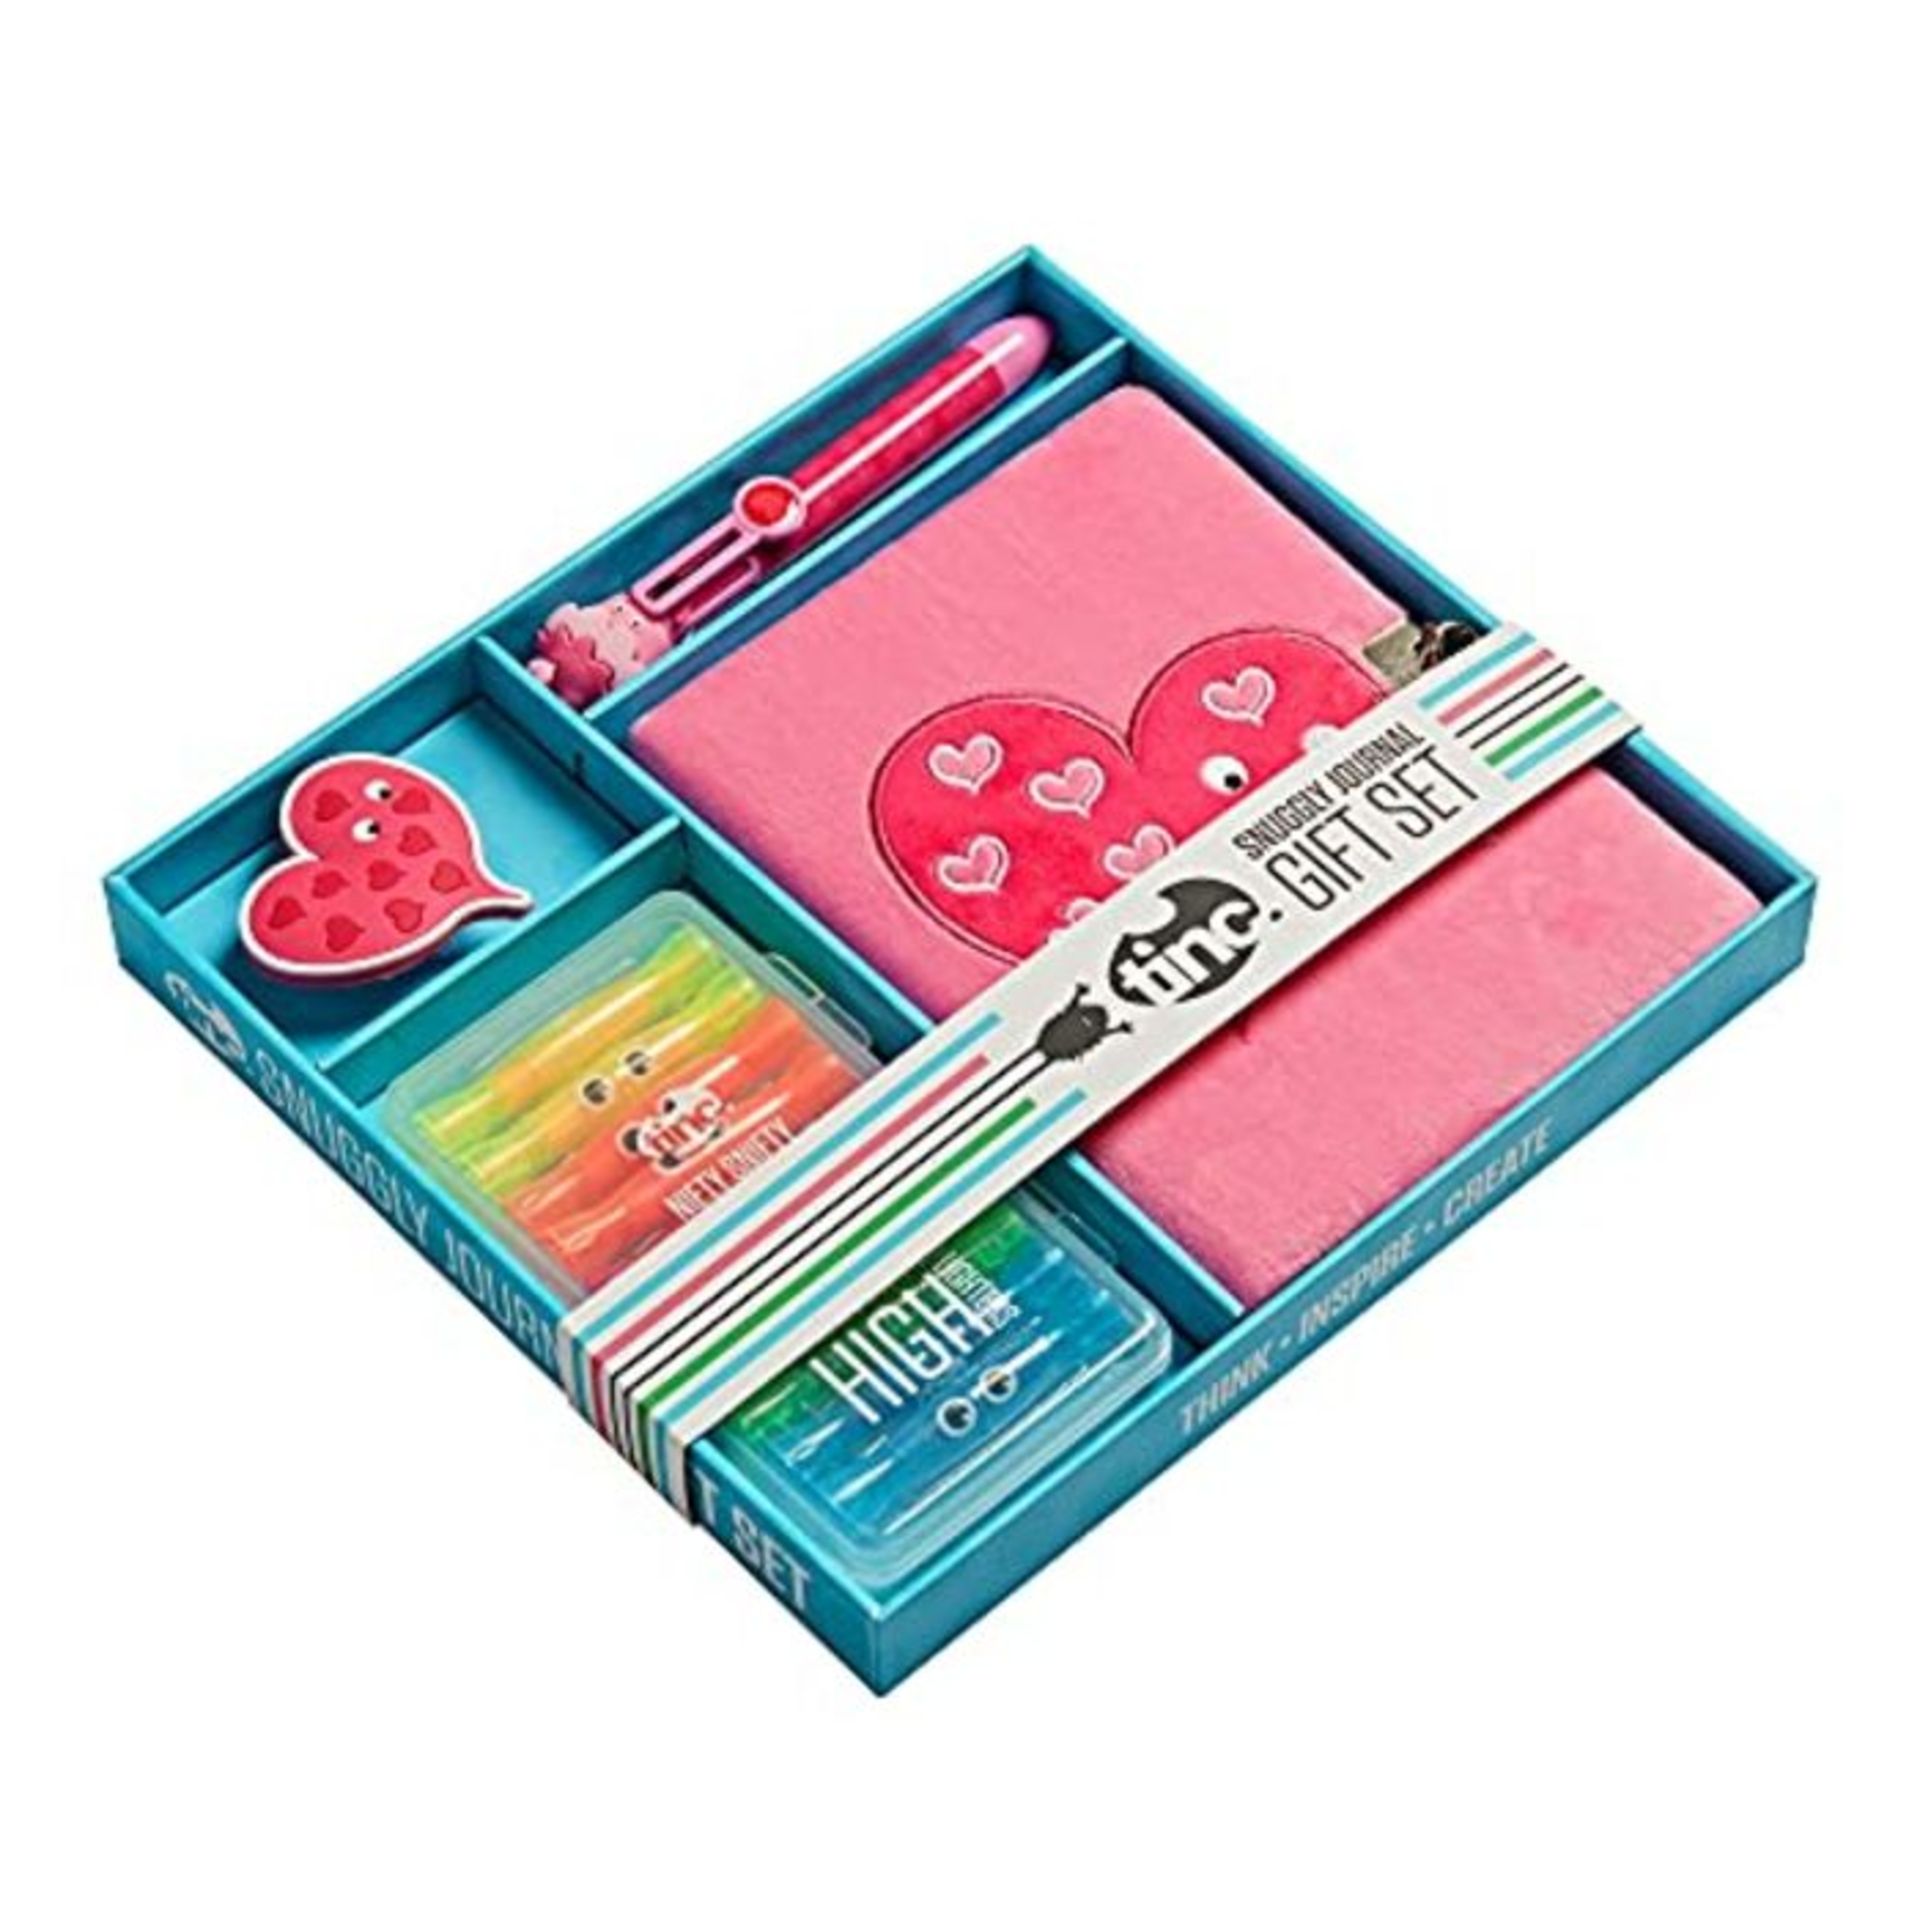 Tinc BXGS02PK Snuggly Journal Boxed Gift Set, Pink